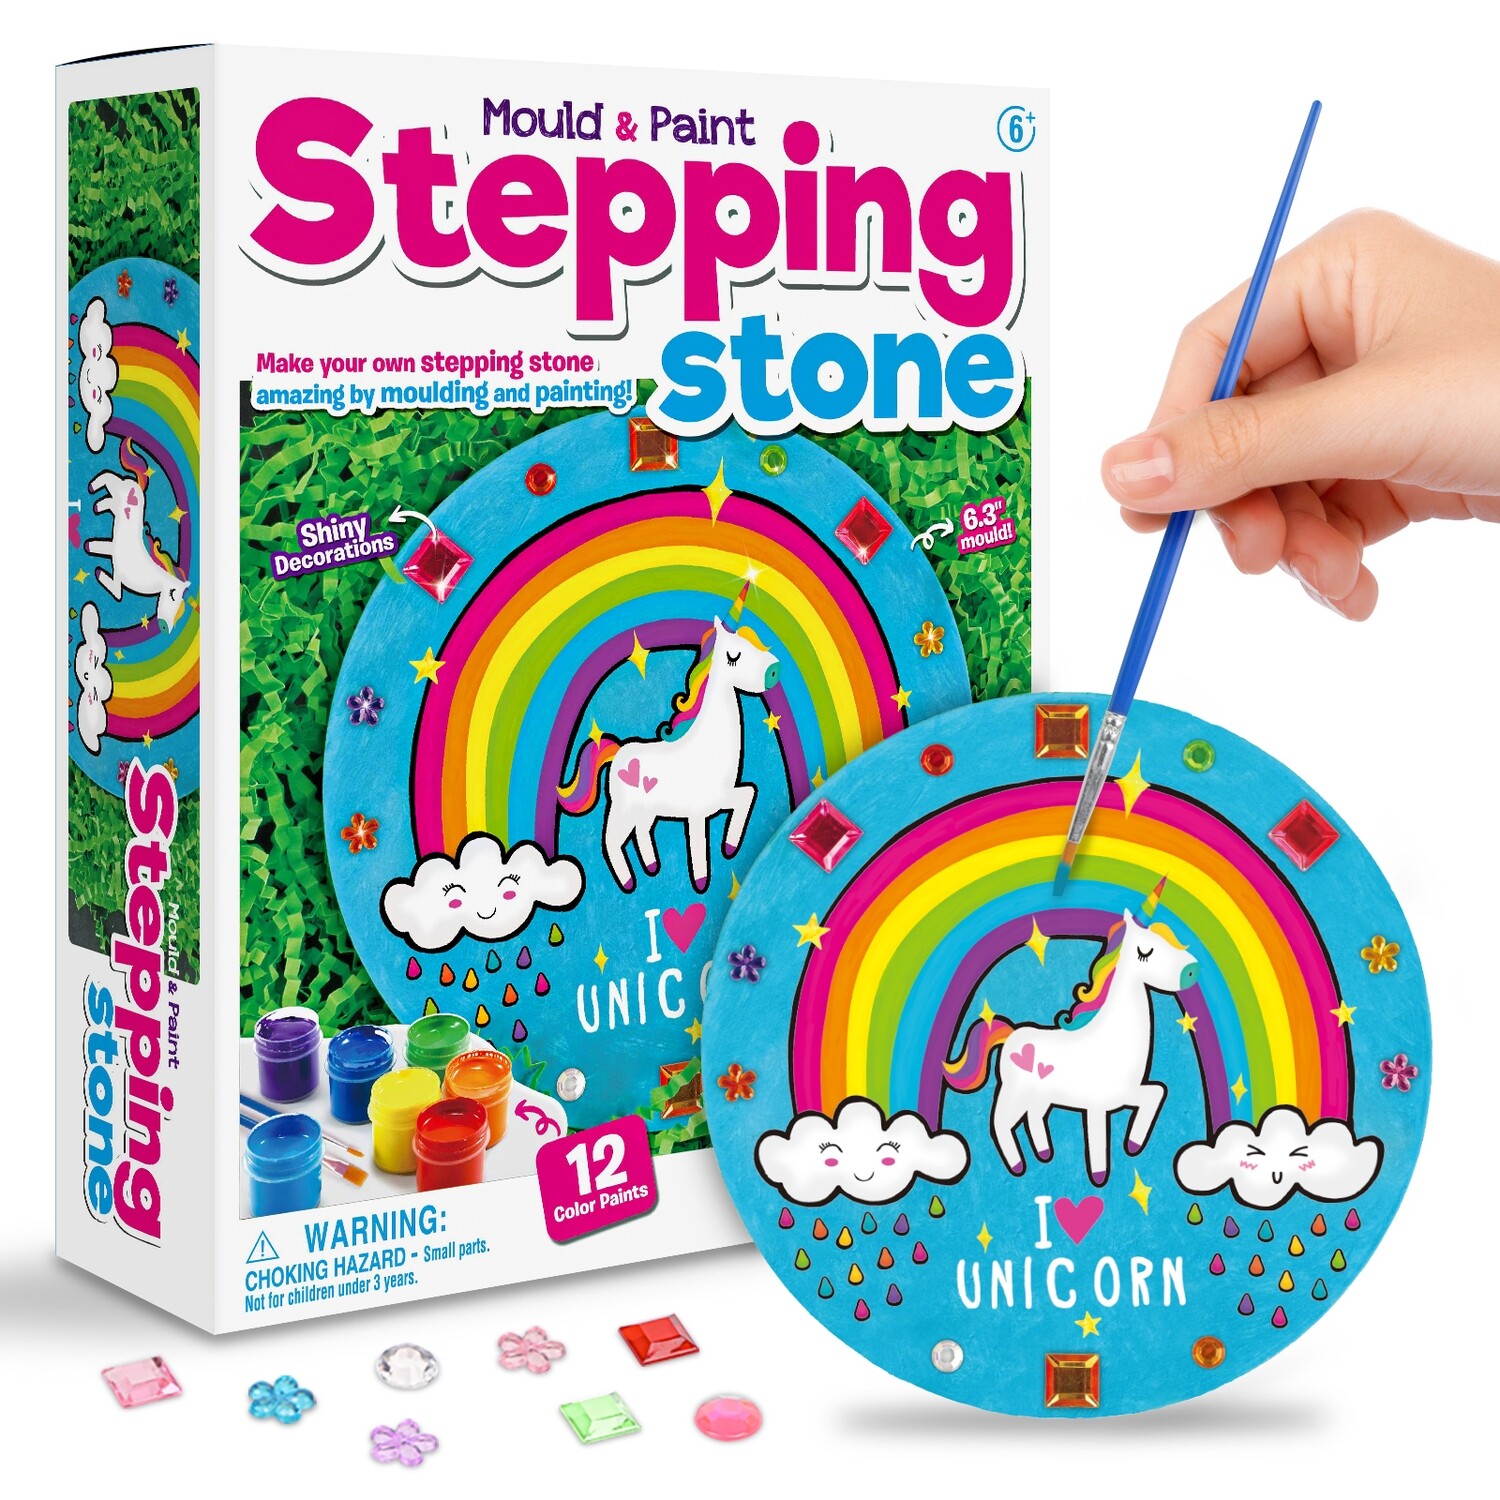 Mould & Paint Stepping Stone